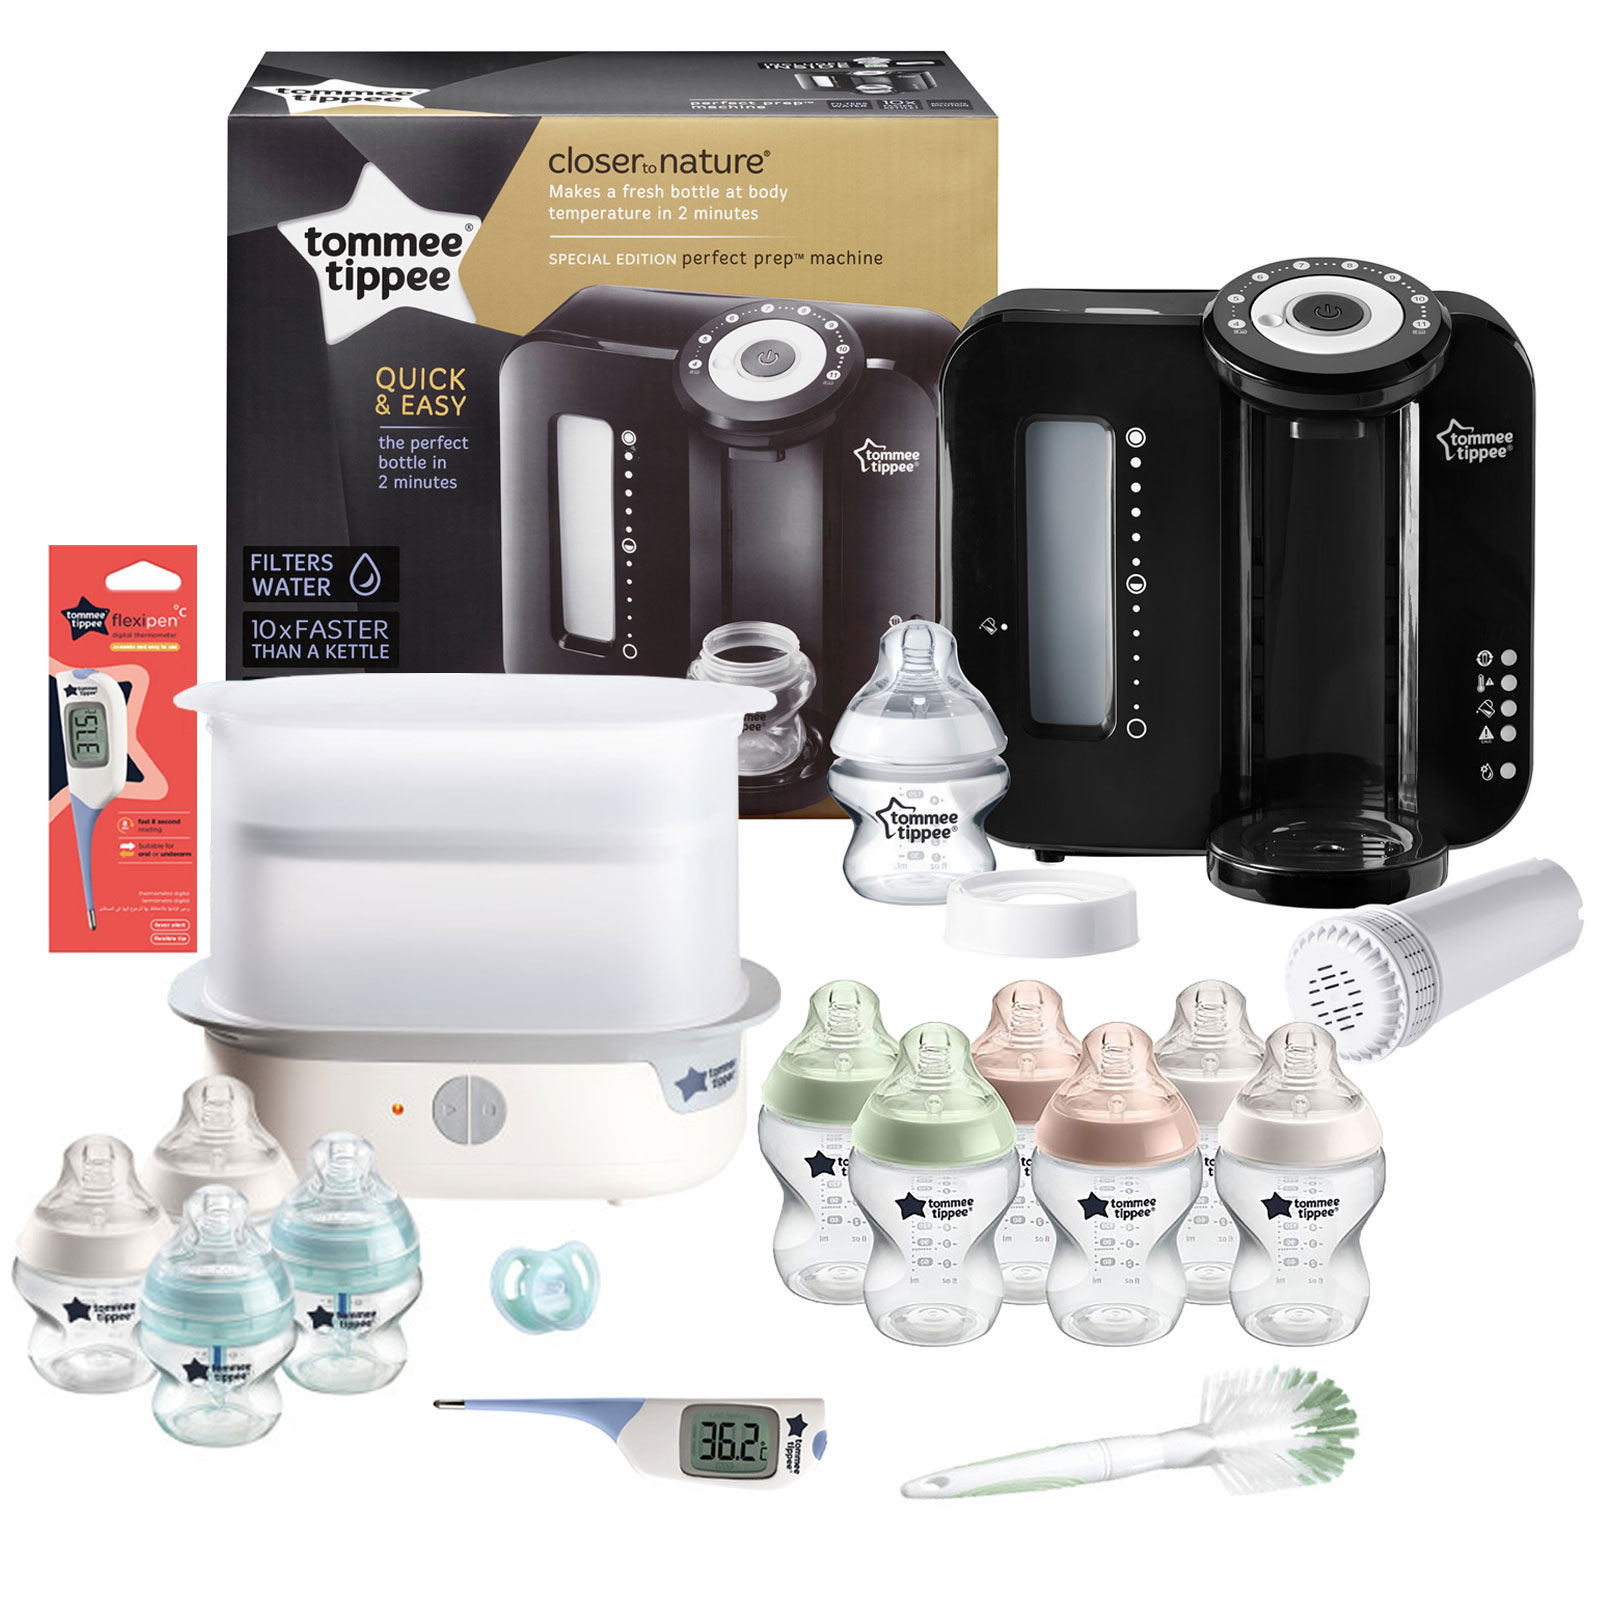 Tommee Tippee 16pc Perfect Prep Machine Complete Steriliser Baby Bottle and Thermometer Feeding Bundle - Black / Natural